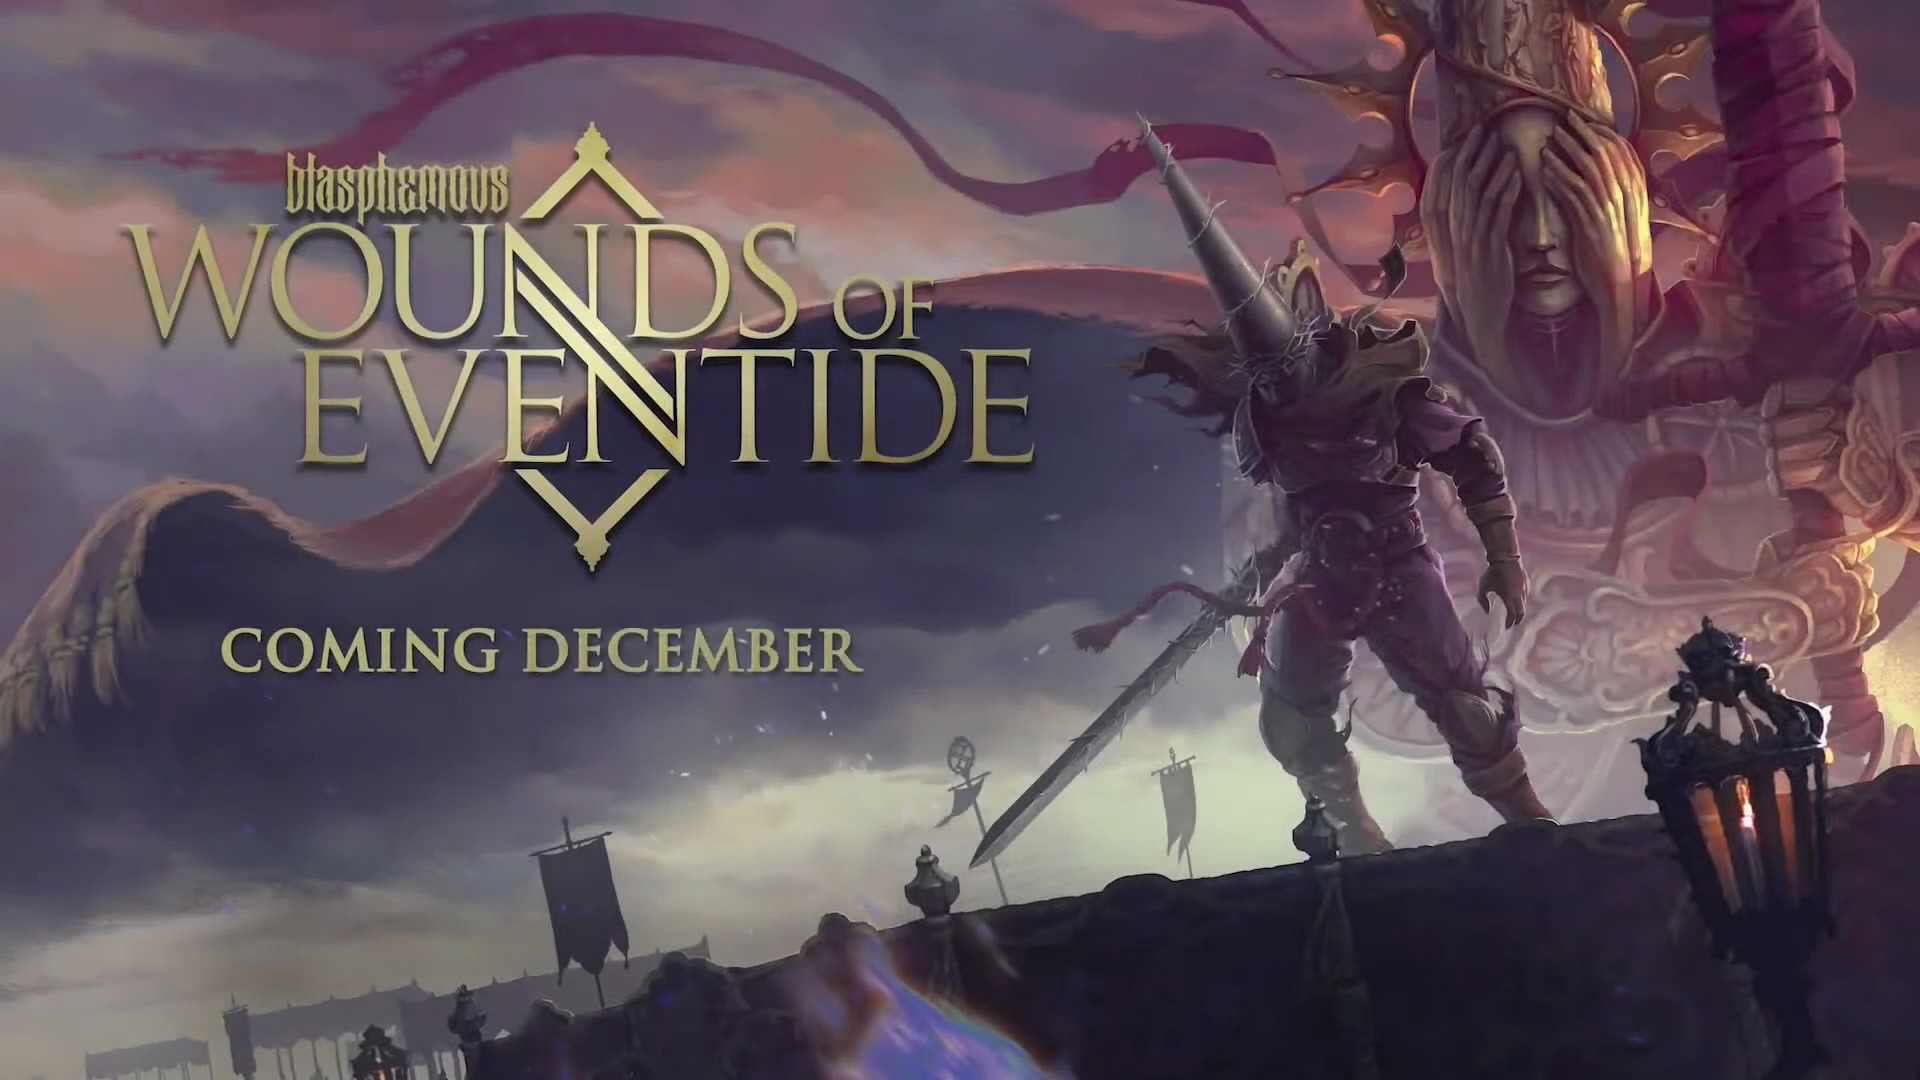 blasphemous wounds of eventide coming december featured image